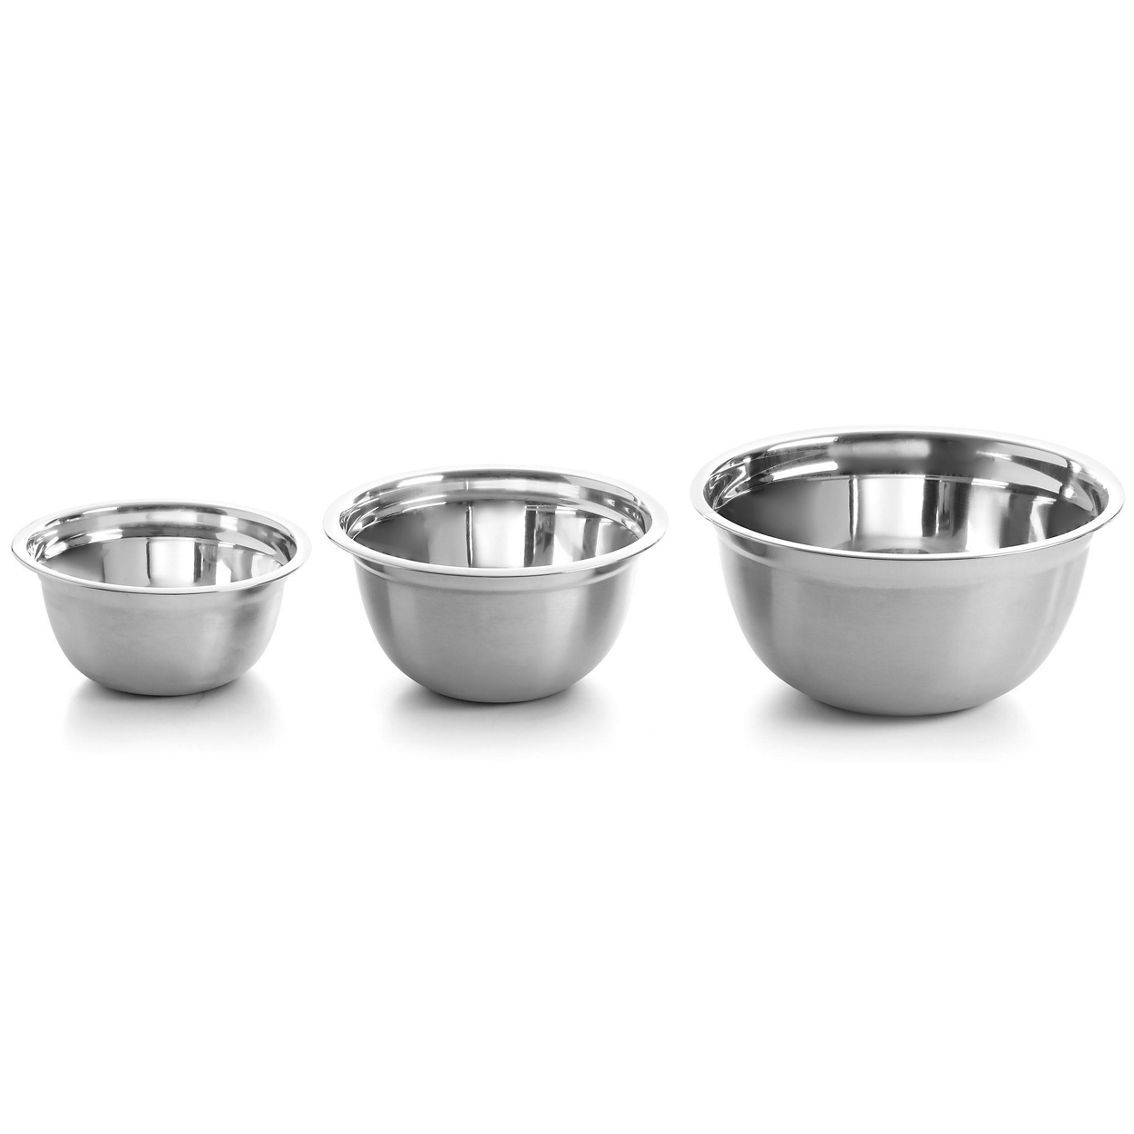 Oster Rosamond 3 Piece Stainless Steel Mixing Bowl Set in Silver - Image 2 of 5